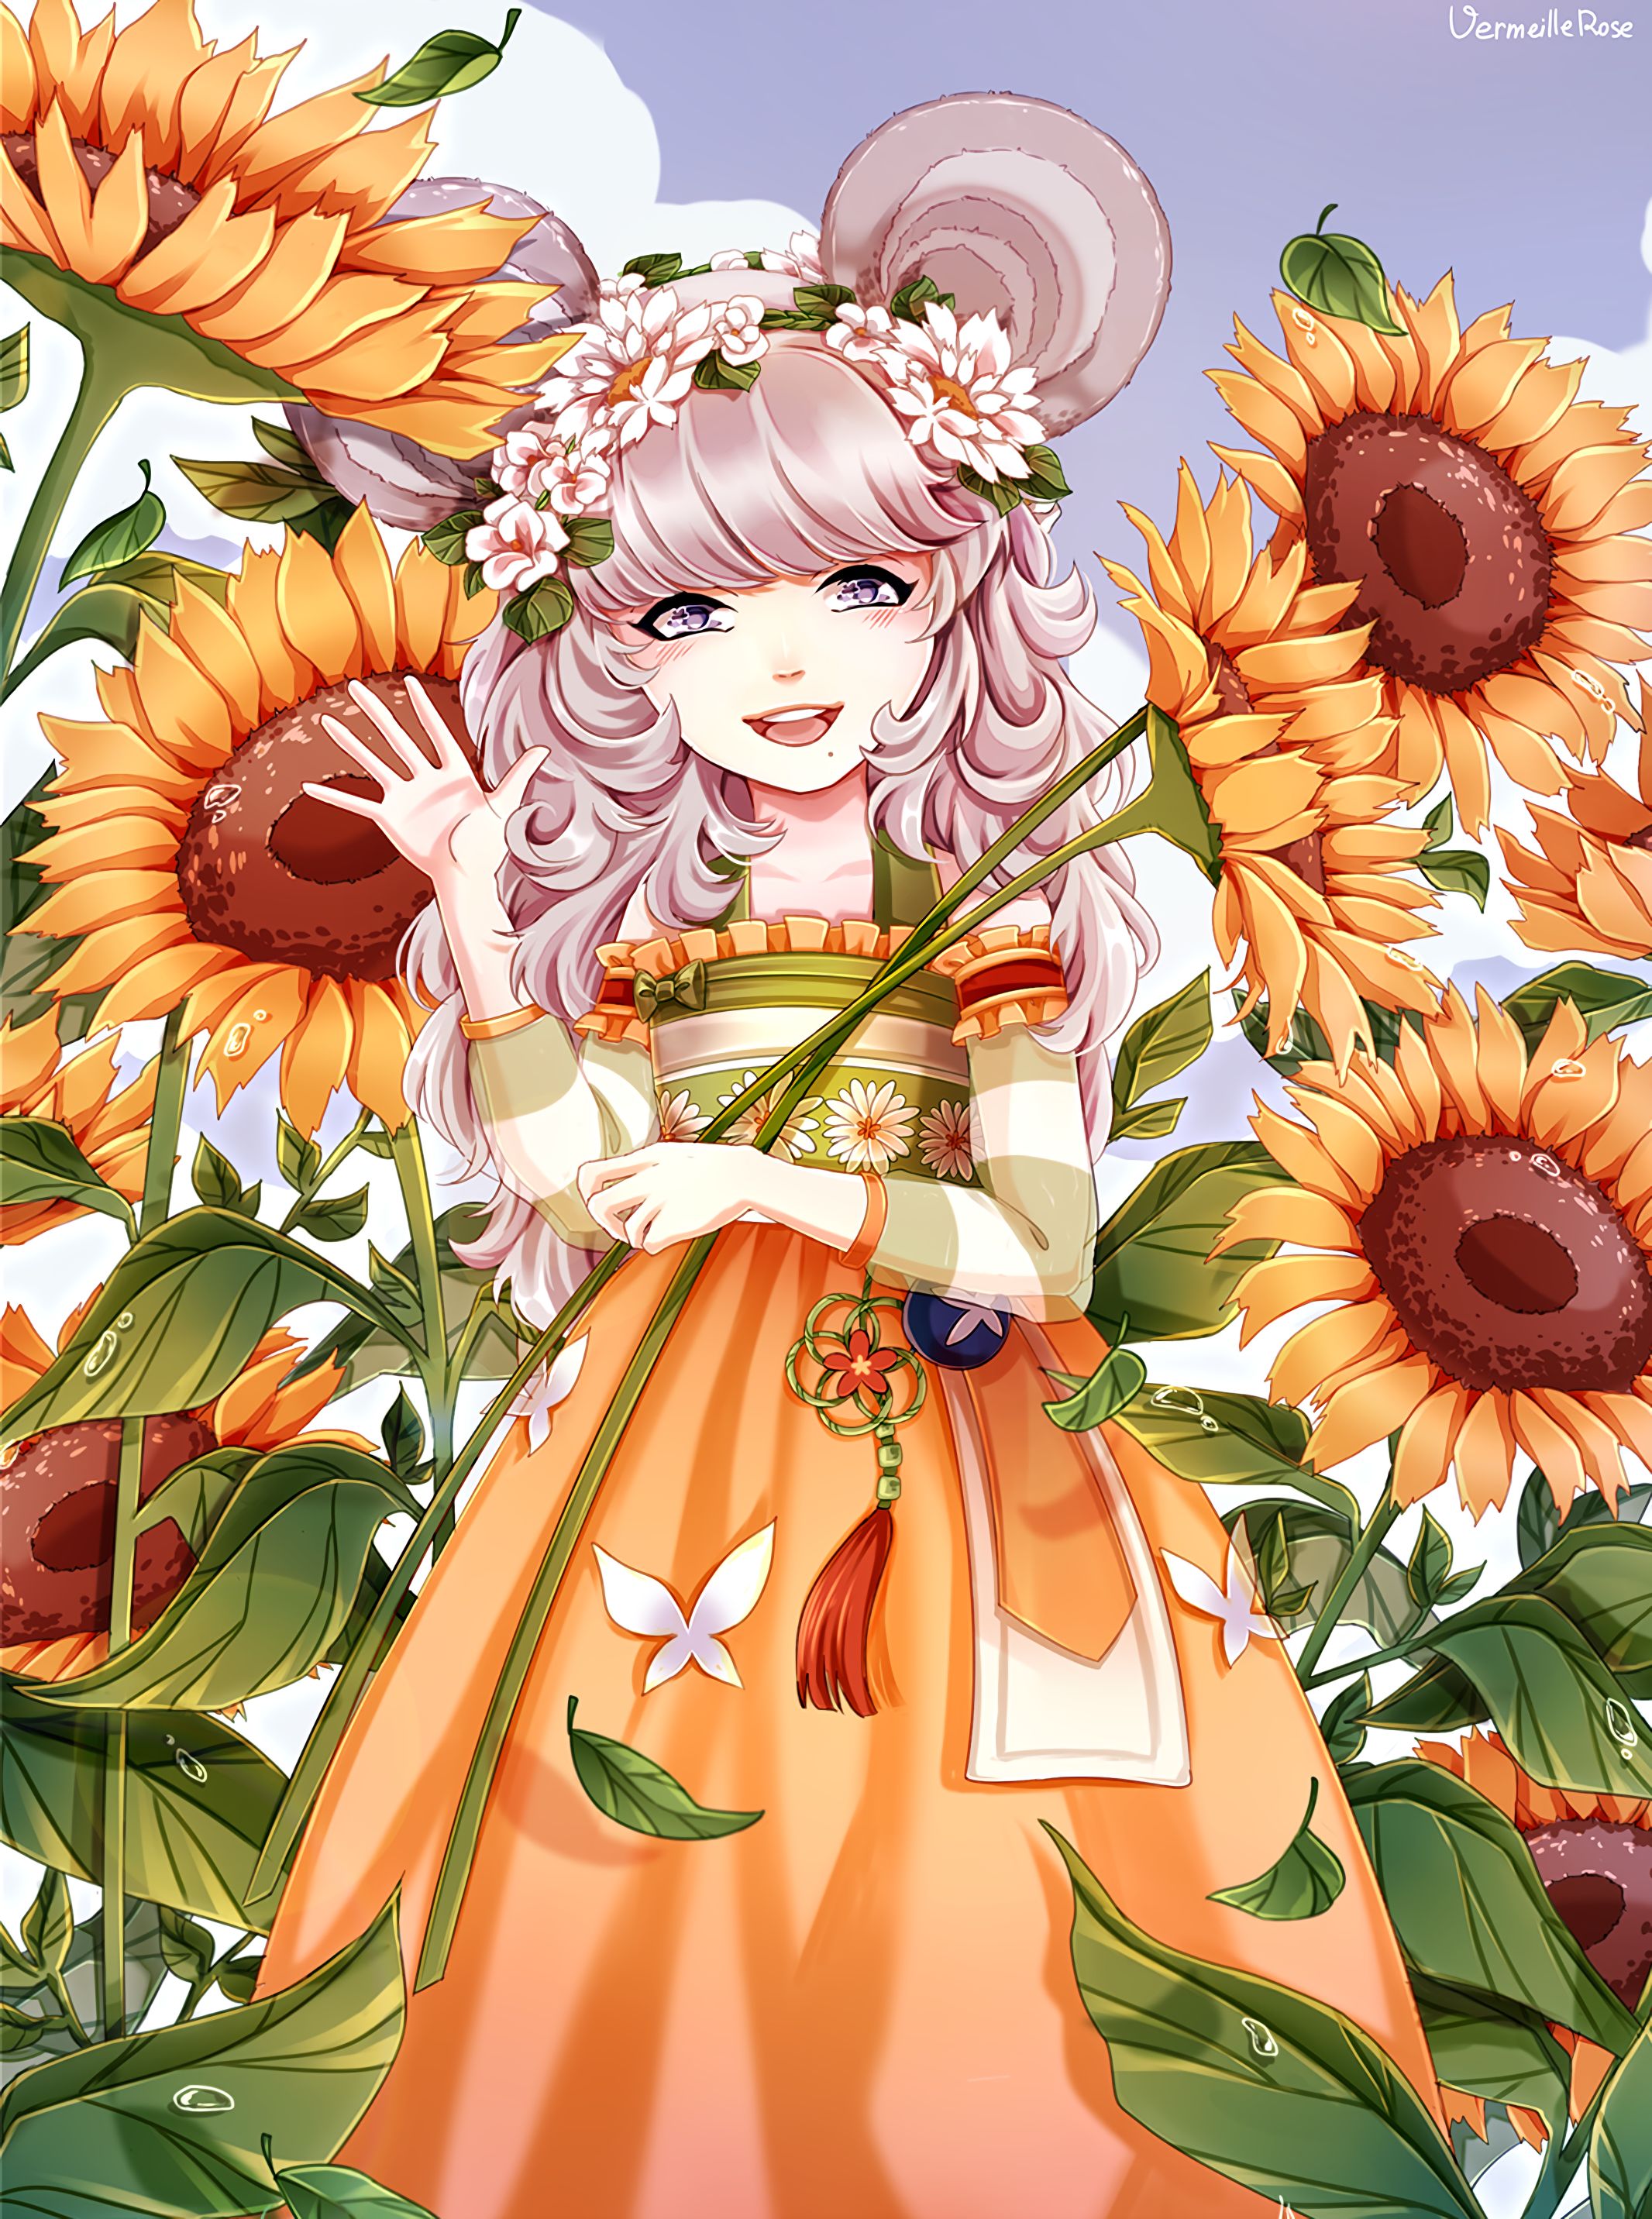 157185 download wallpaper girl, anime, sunflowers, art screensavers and pictures for free